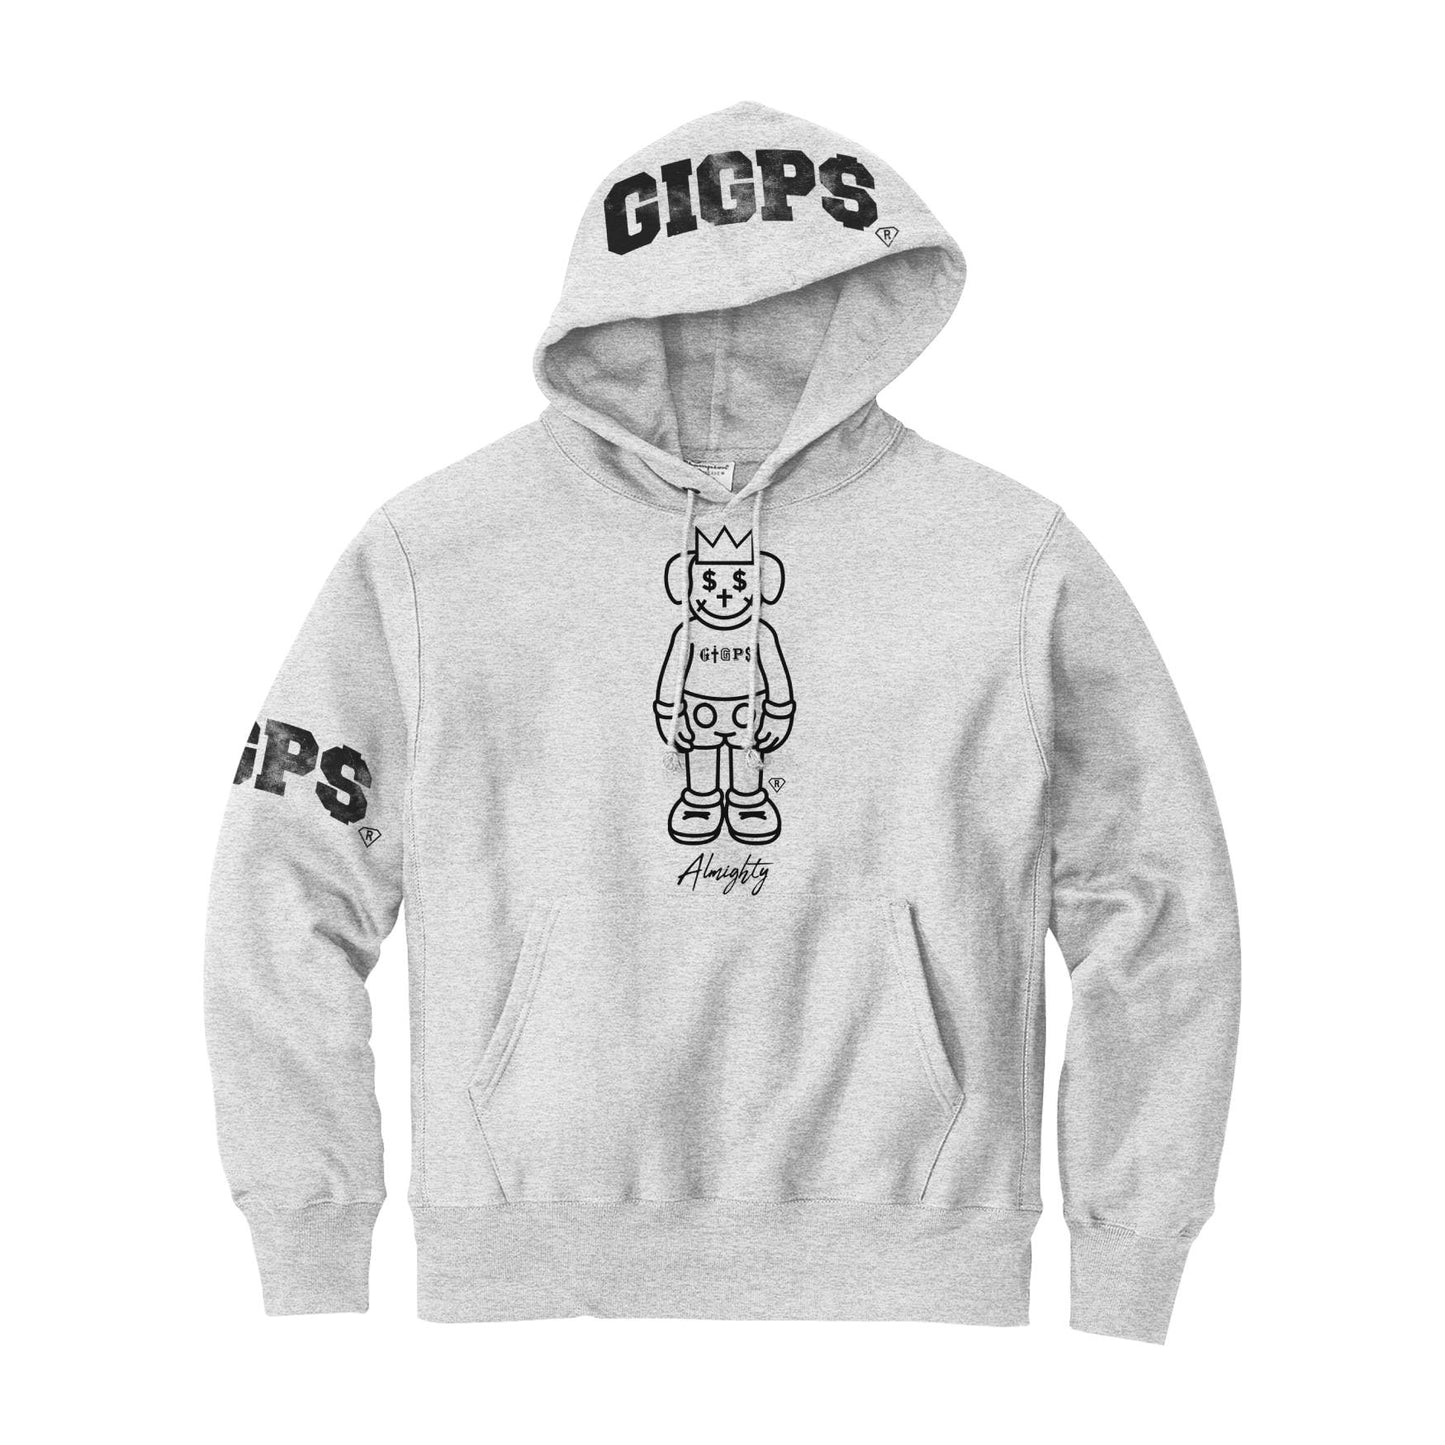 ALMIGHTY OREO COOKIE HOODIE - WHITE